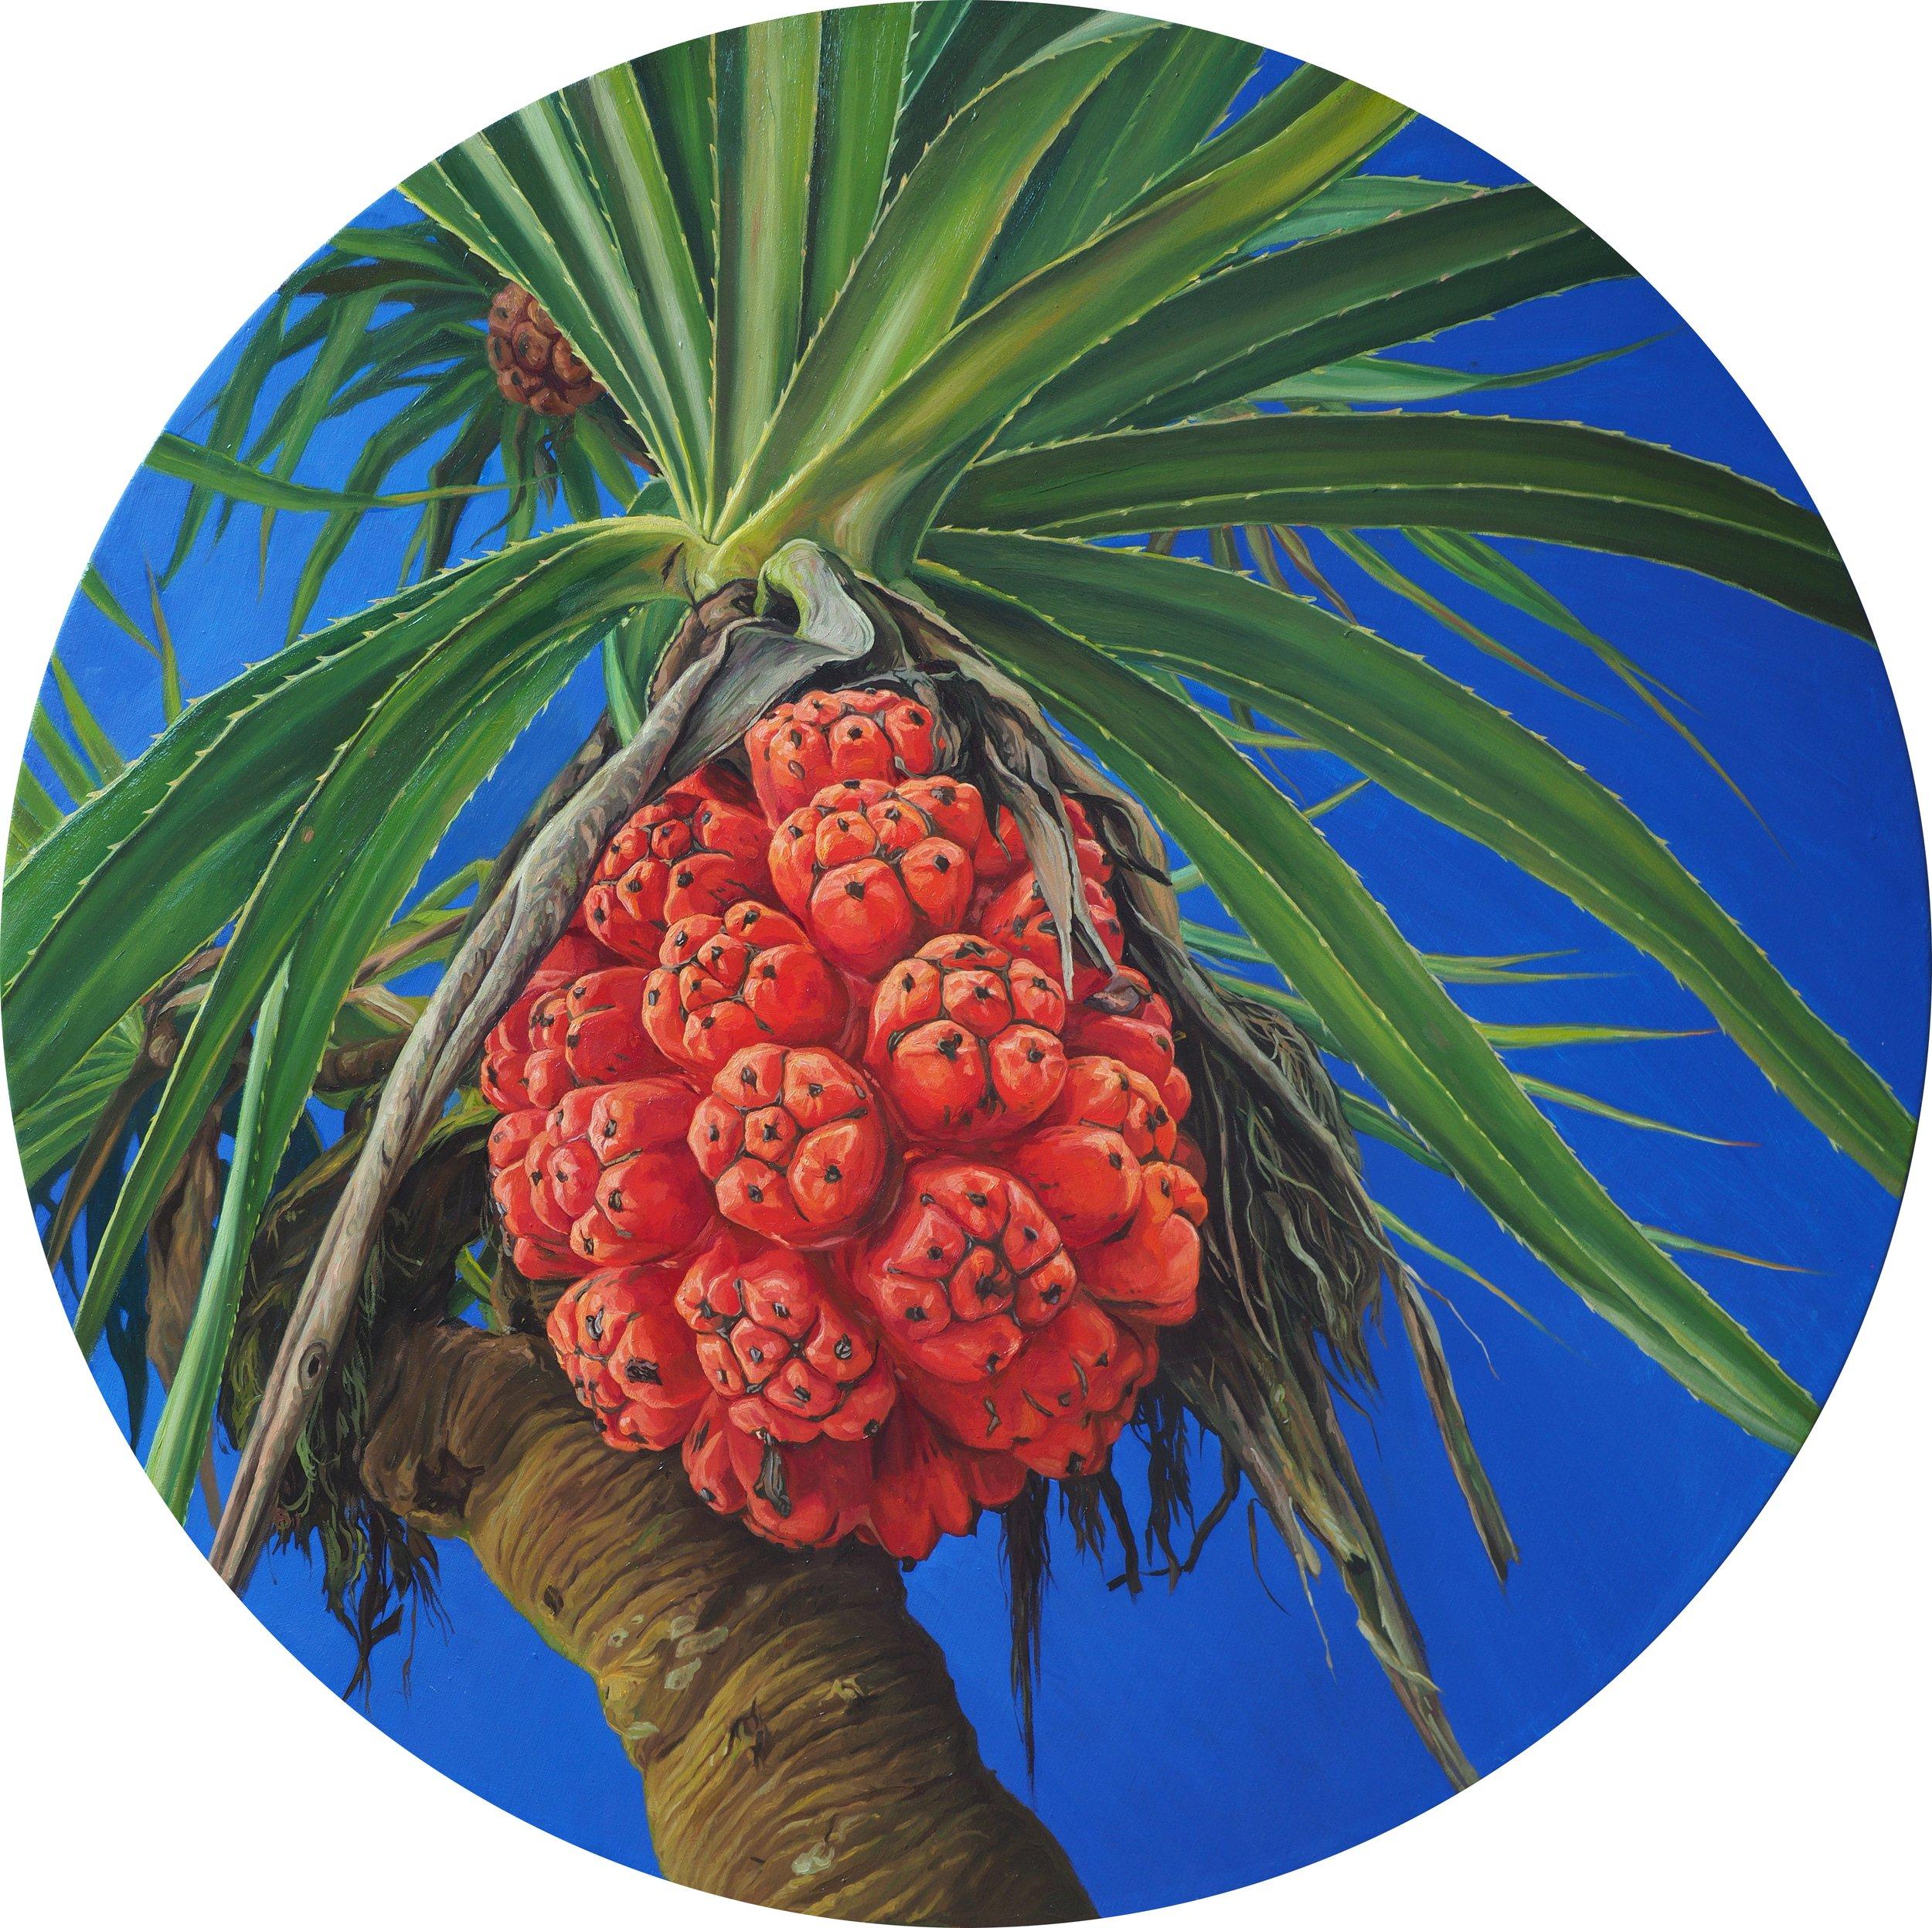 "Pandanus" Oil Painting D 39" inch by Sasha Sokolova

Bio 
Born in Moscow into a family of artists, Sasha Sokolova is an award winning contemporary realist painter, working across a range of traditional oil and water colour techniques.  Her current